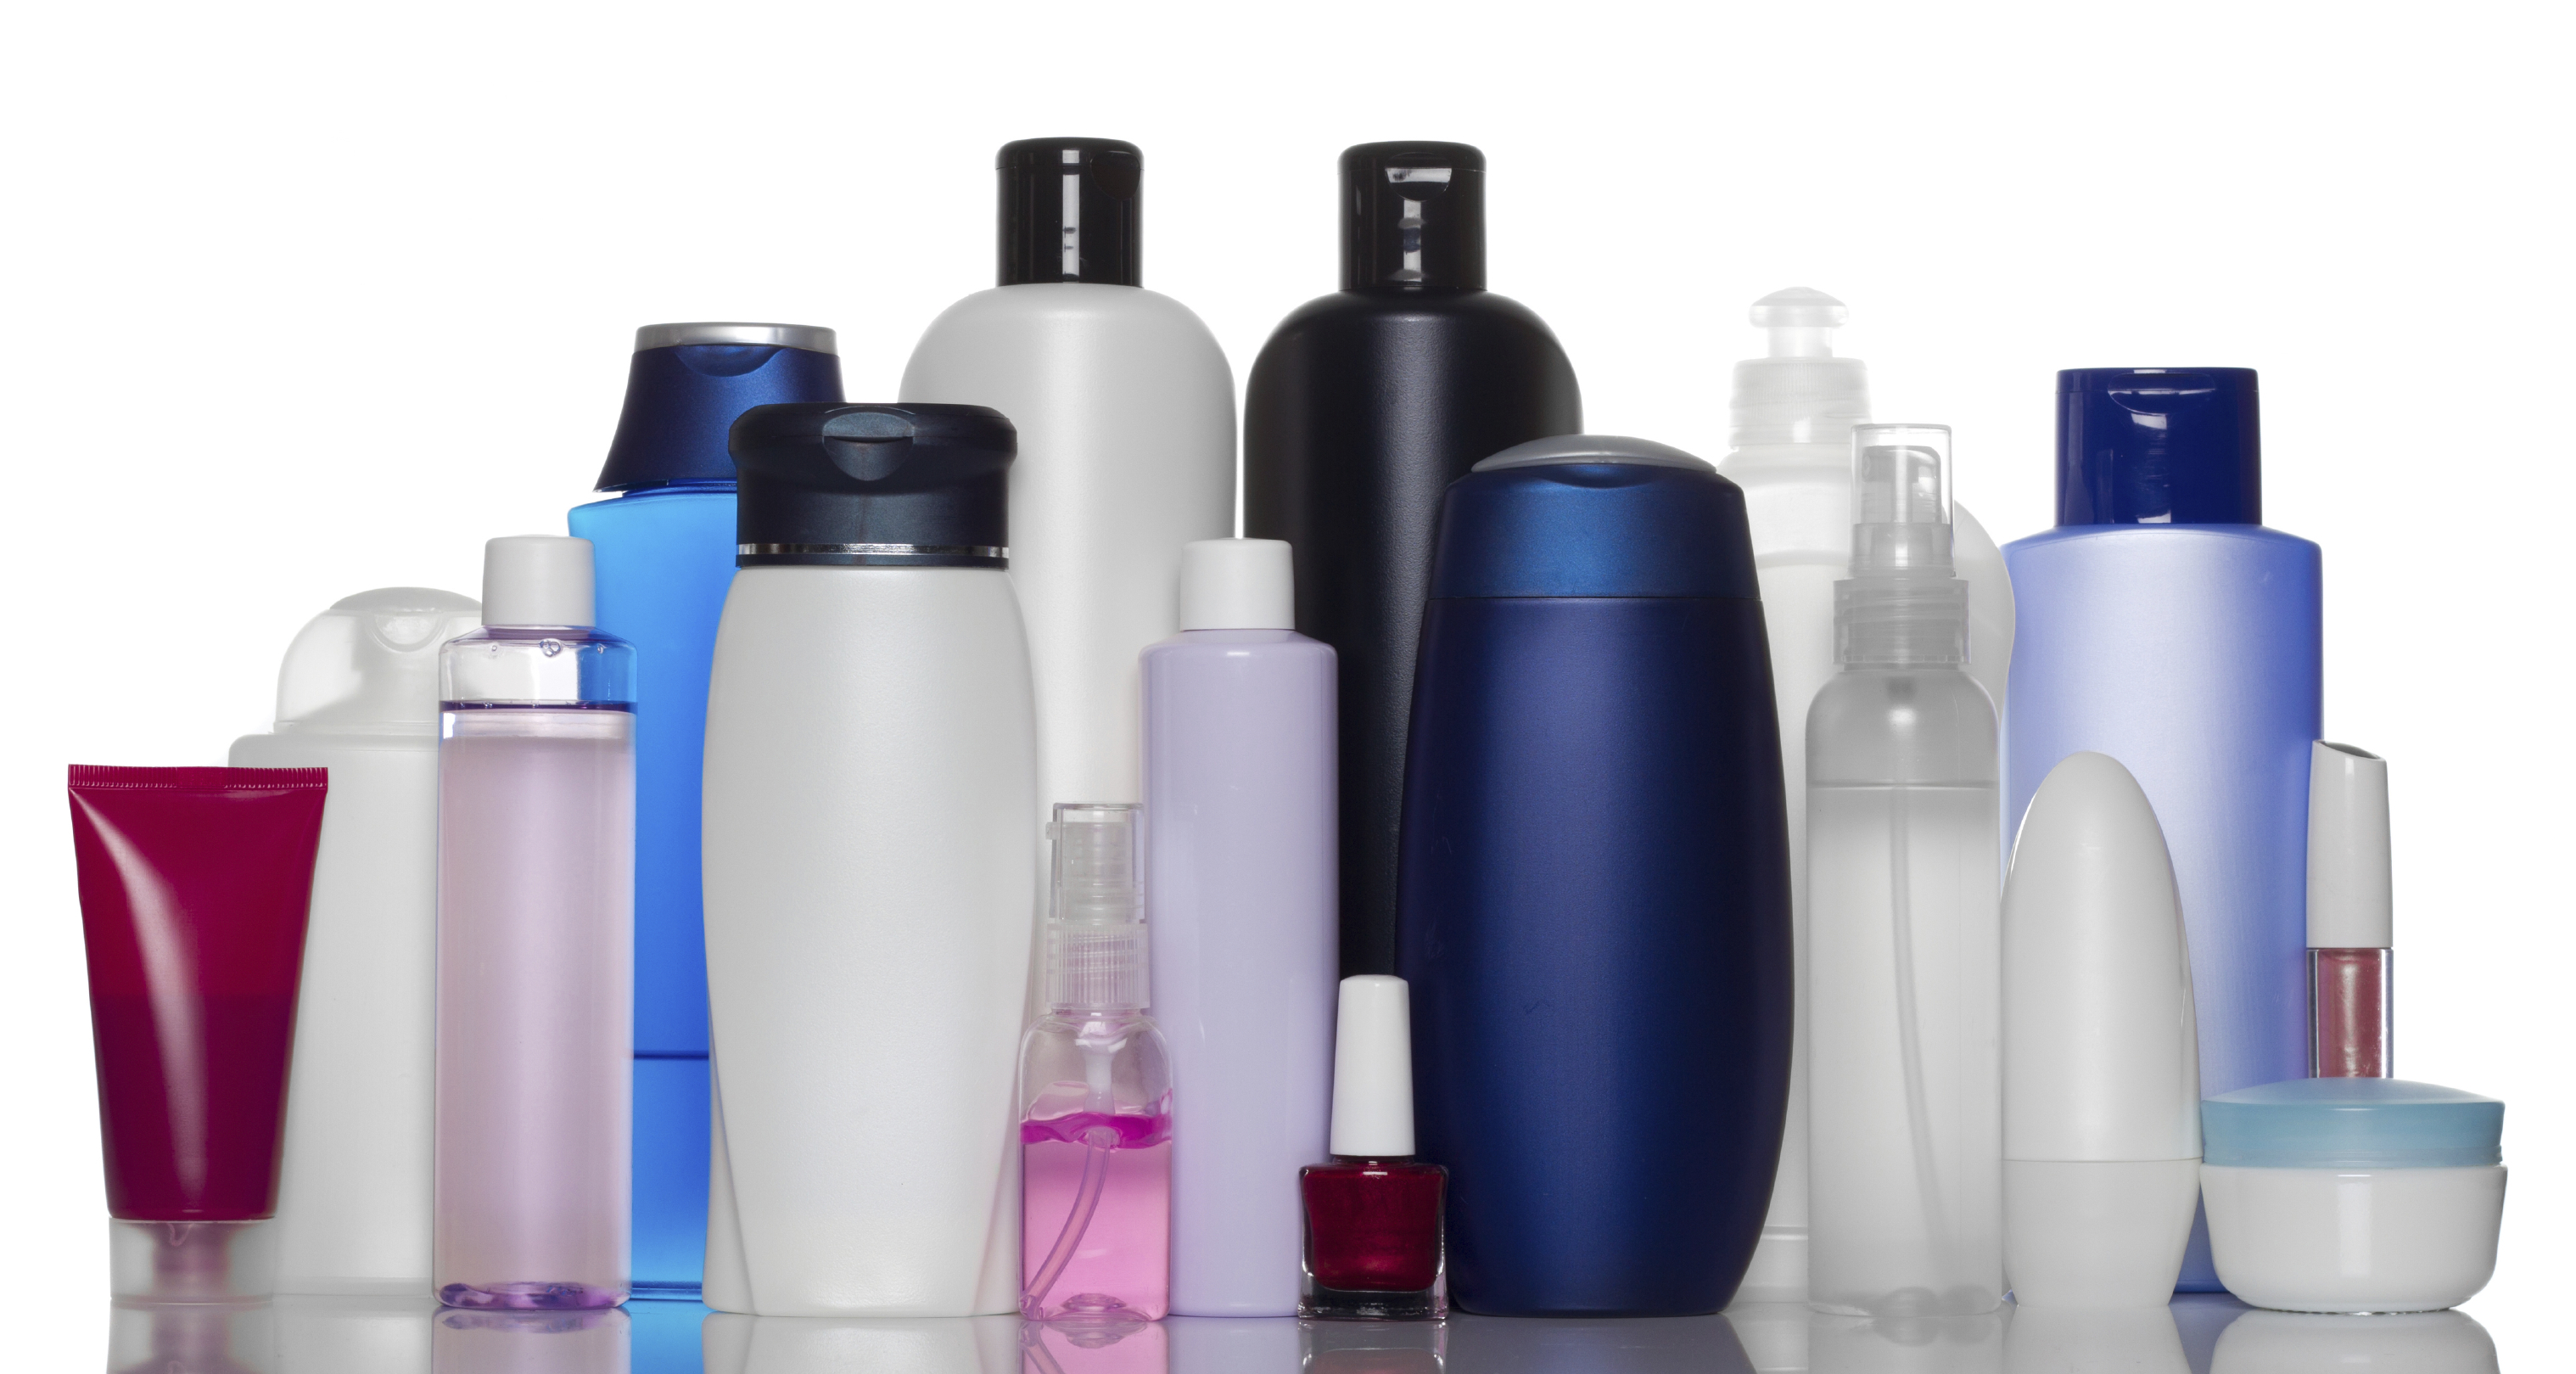 Shampoo bottles that empty completely are in our future